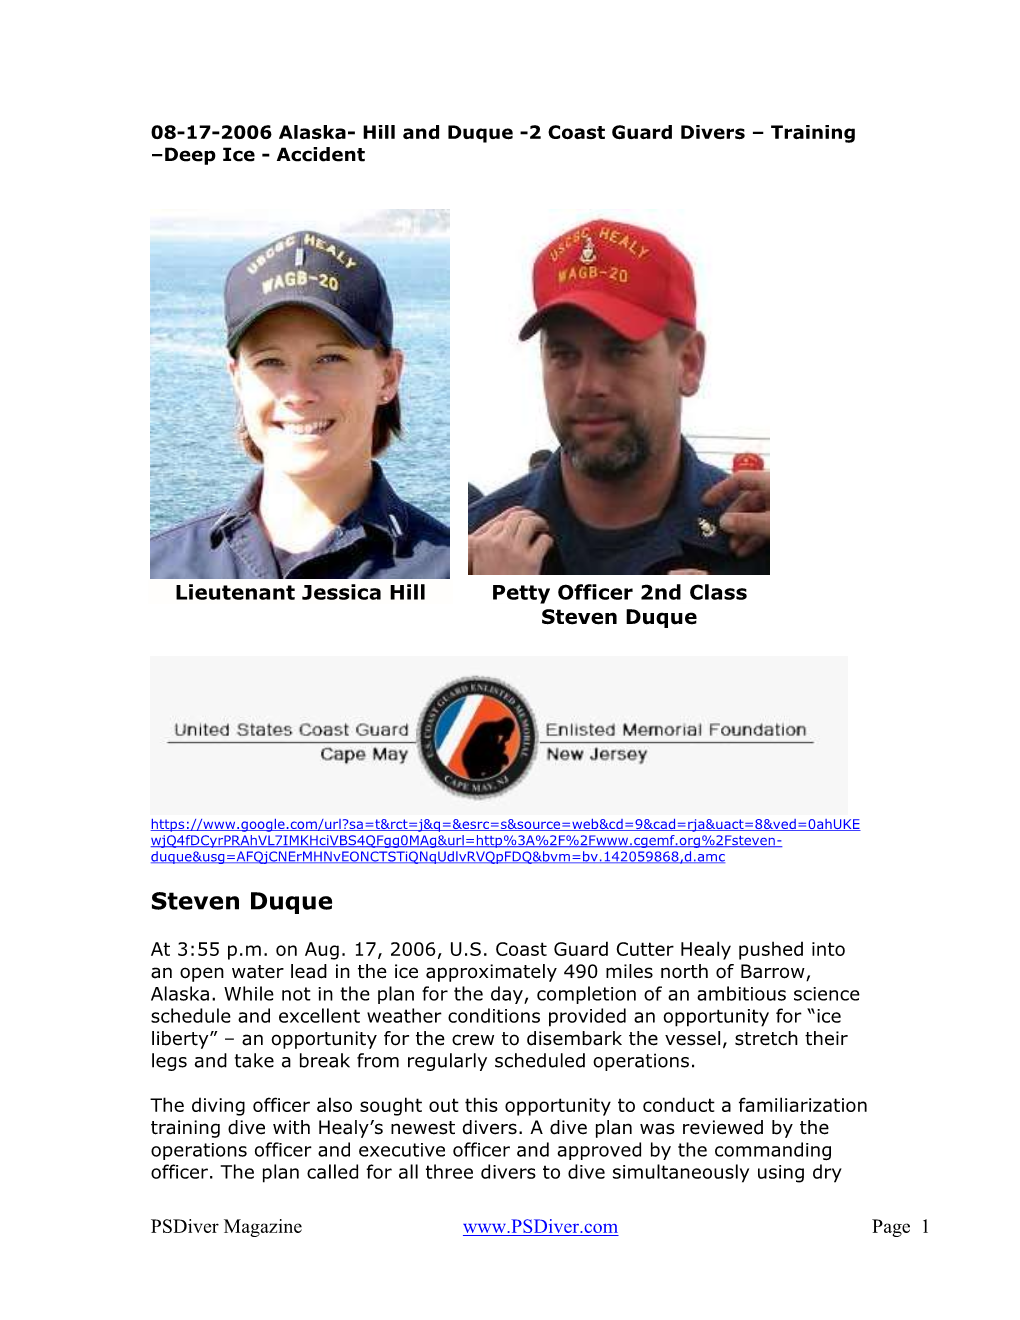 Two Seattle-Based Coast Guardsmen Die During Dive August 18, 2006